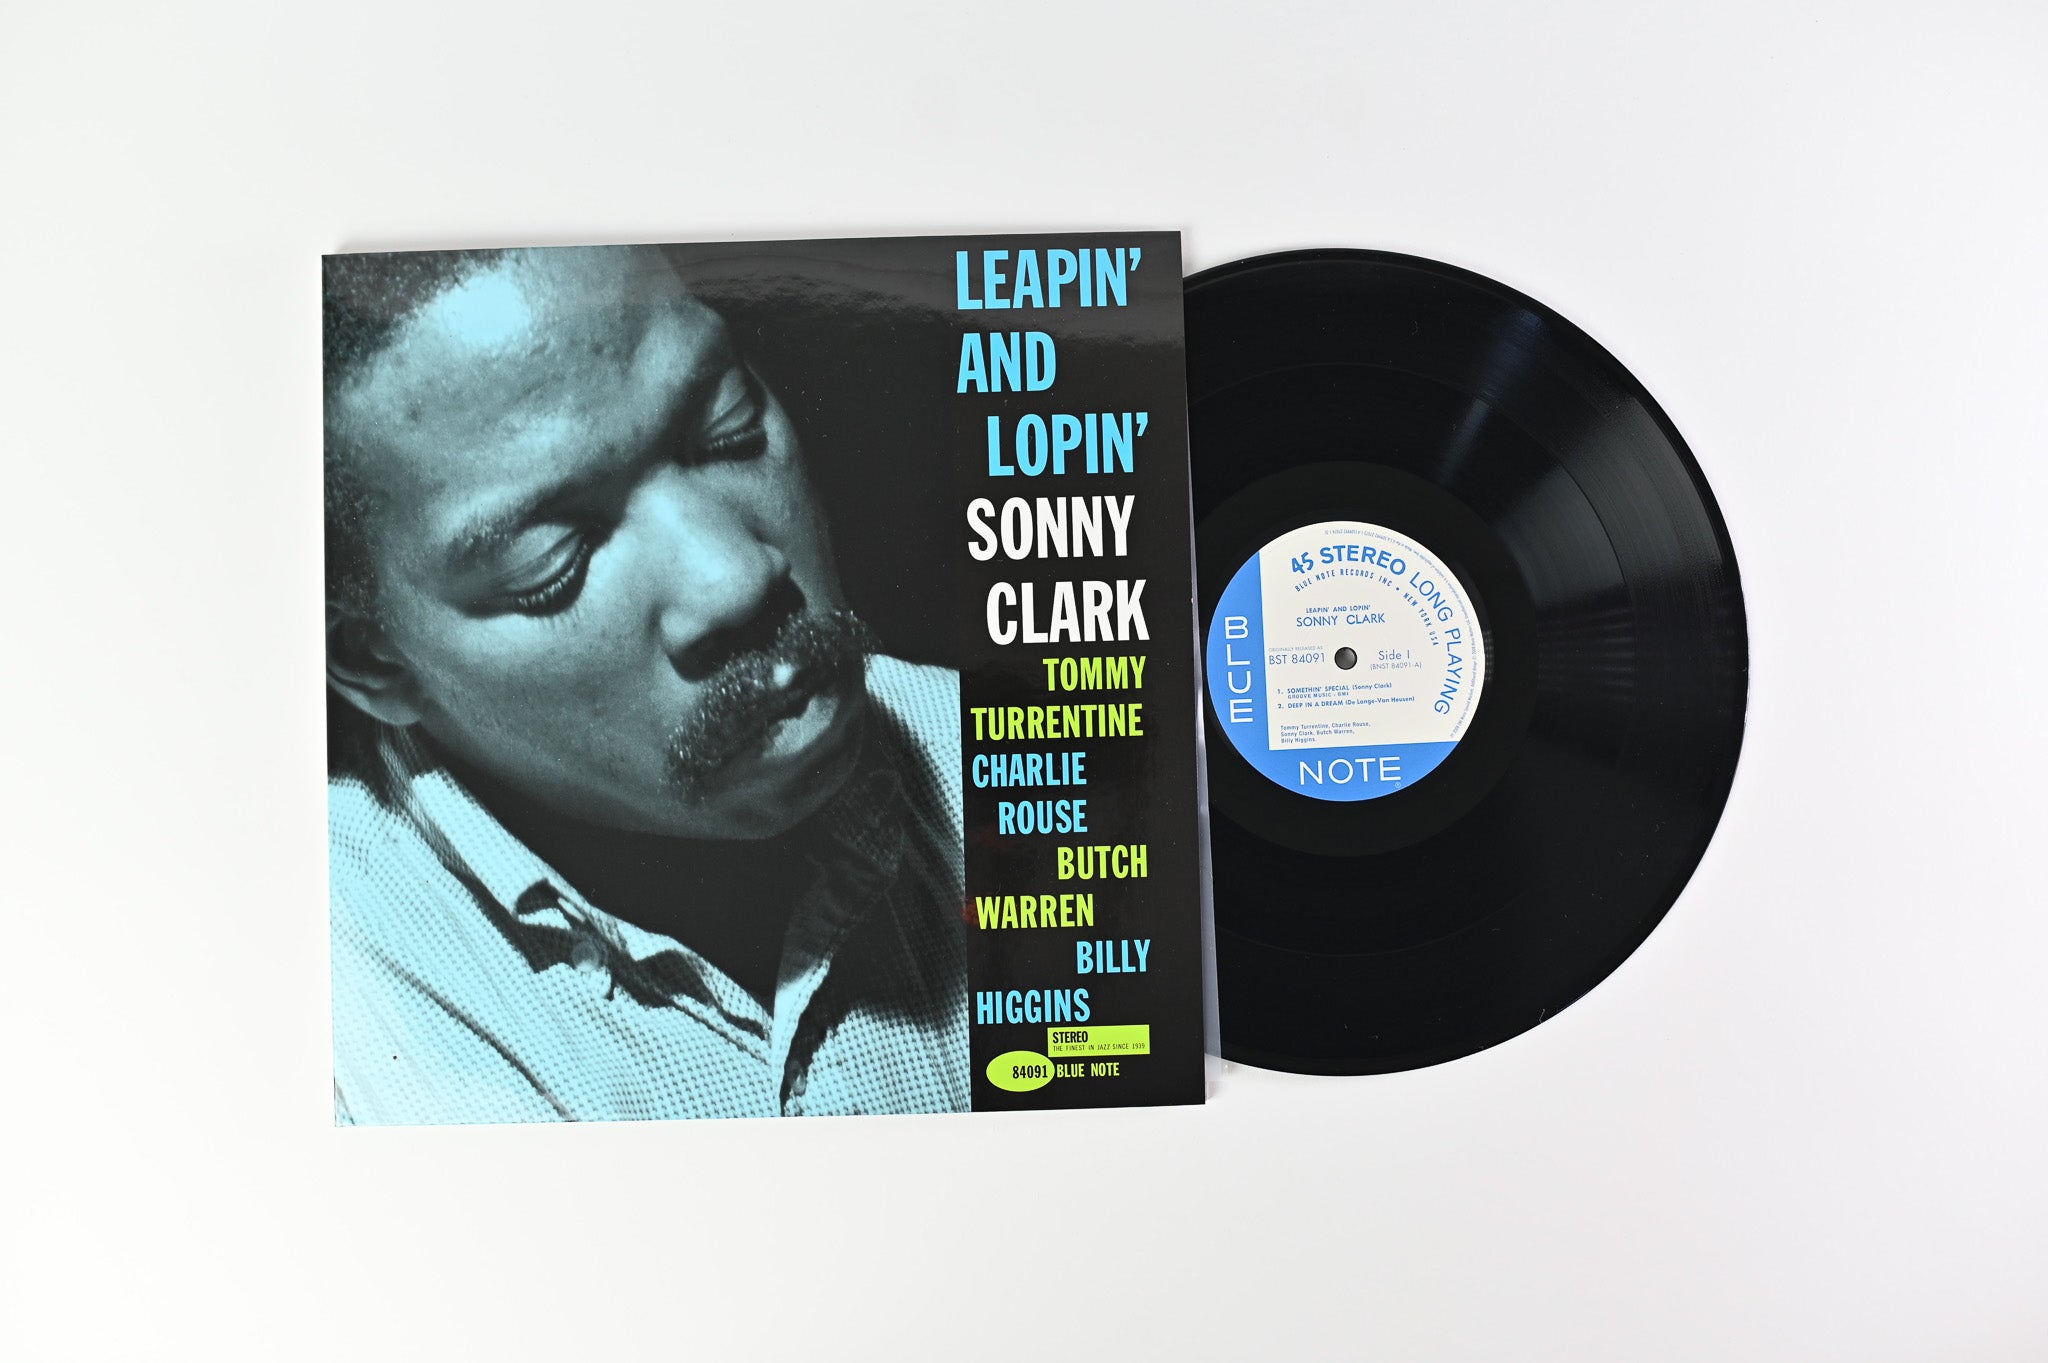 Sonny Clark - Leapin' And Lopin' on Blue Note Music Matters Ltd Reissue 45 RPM